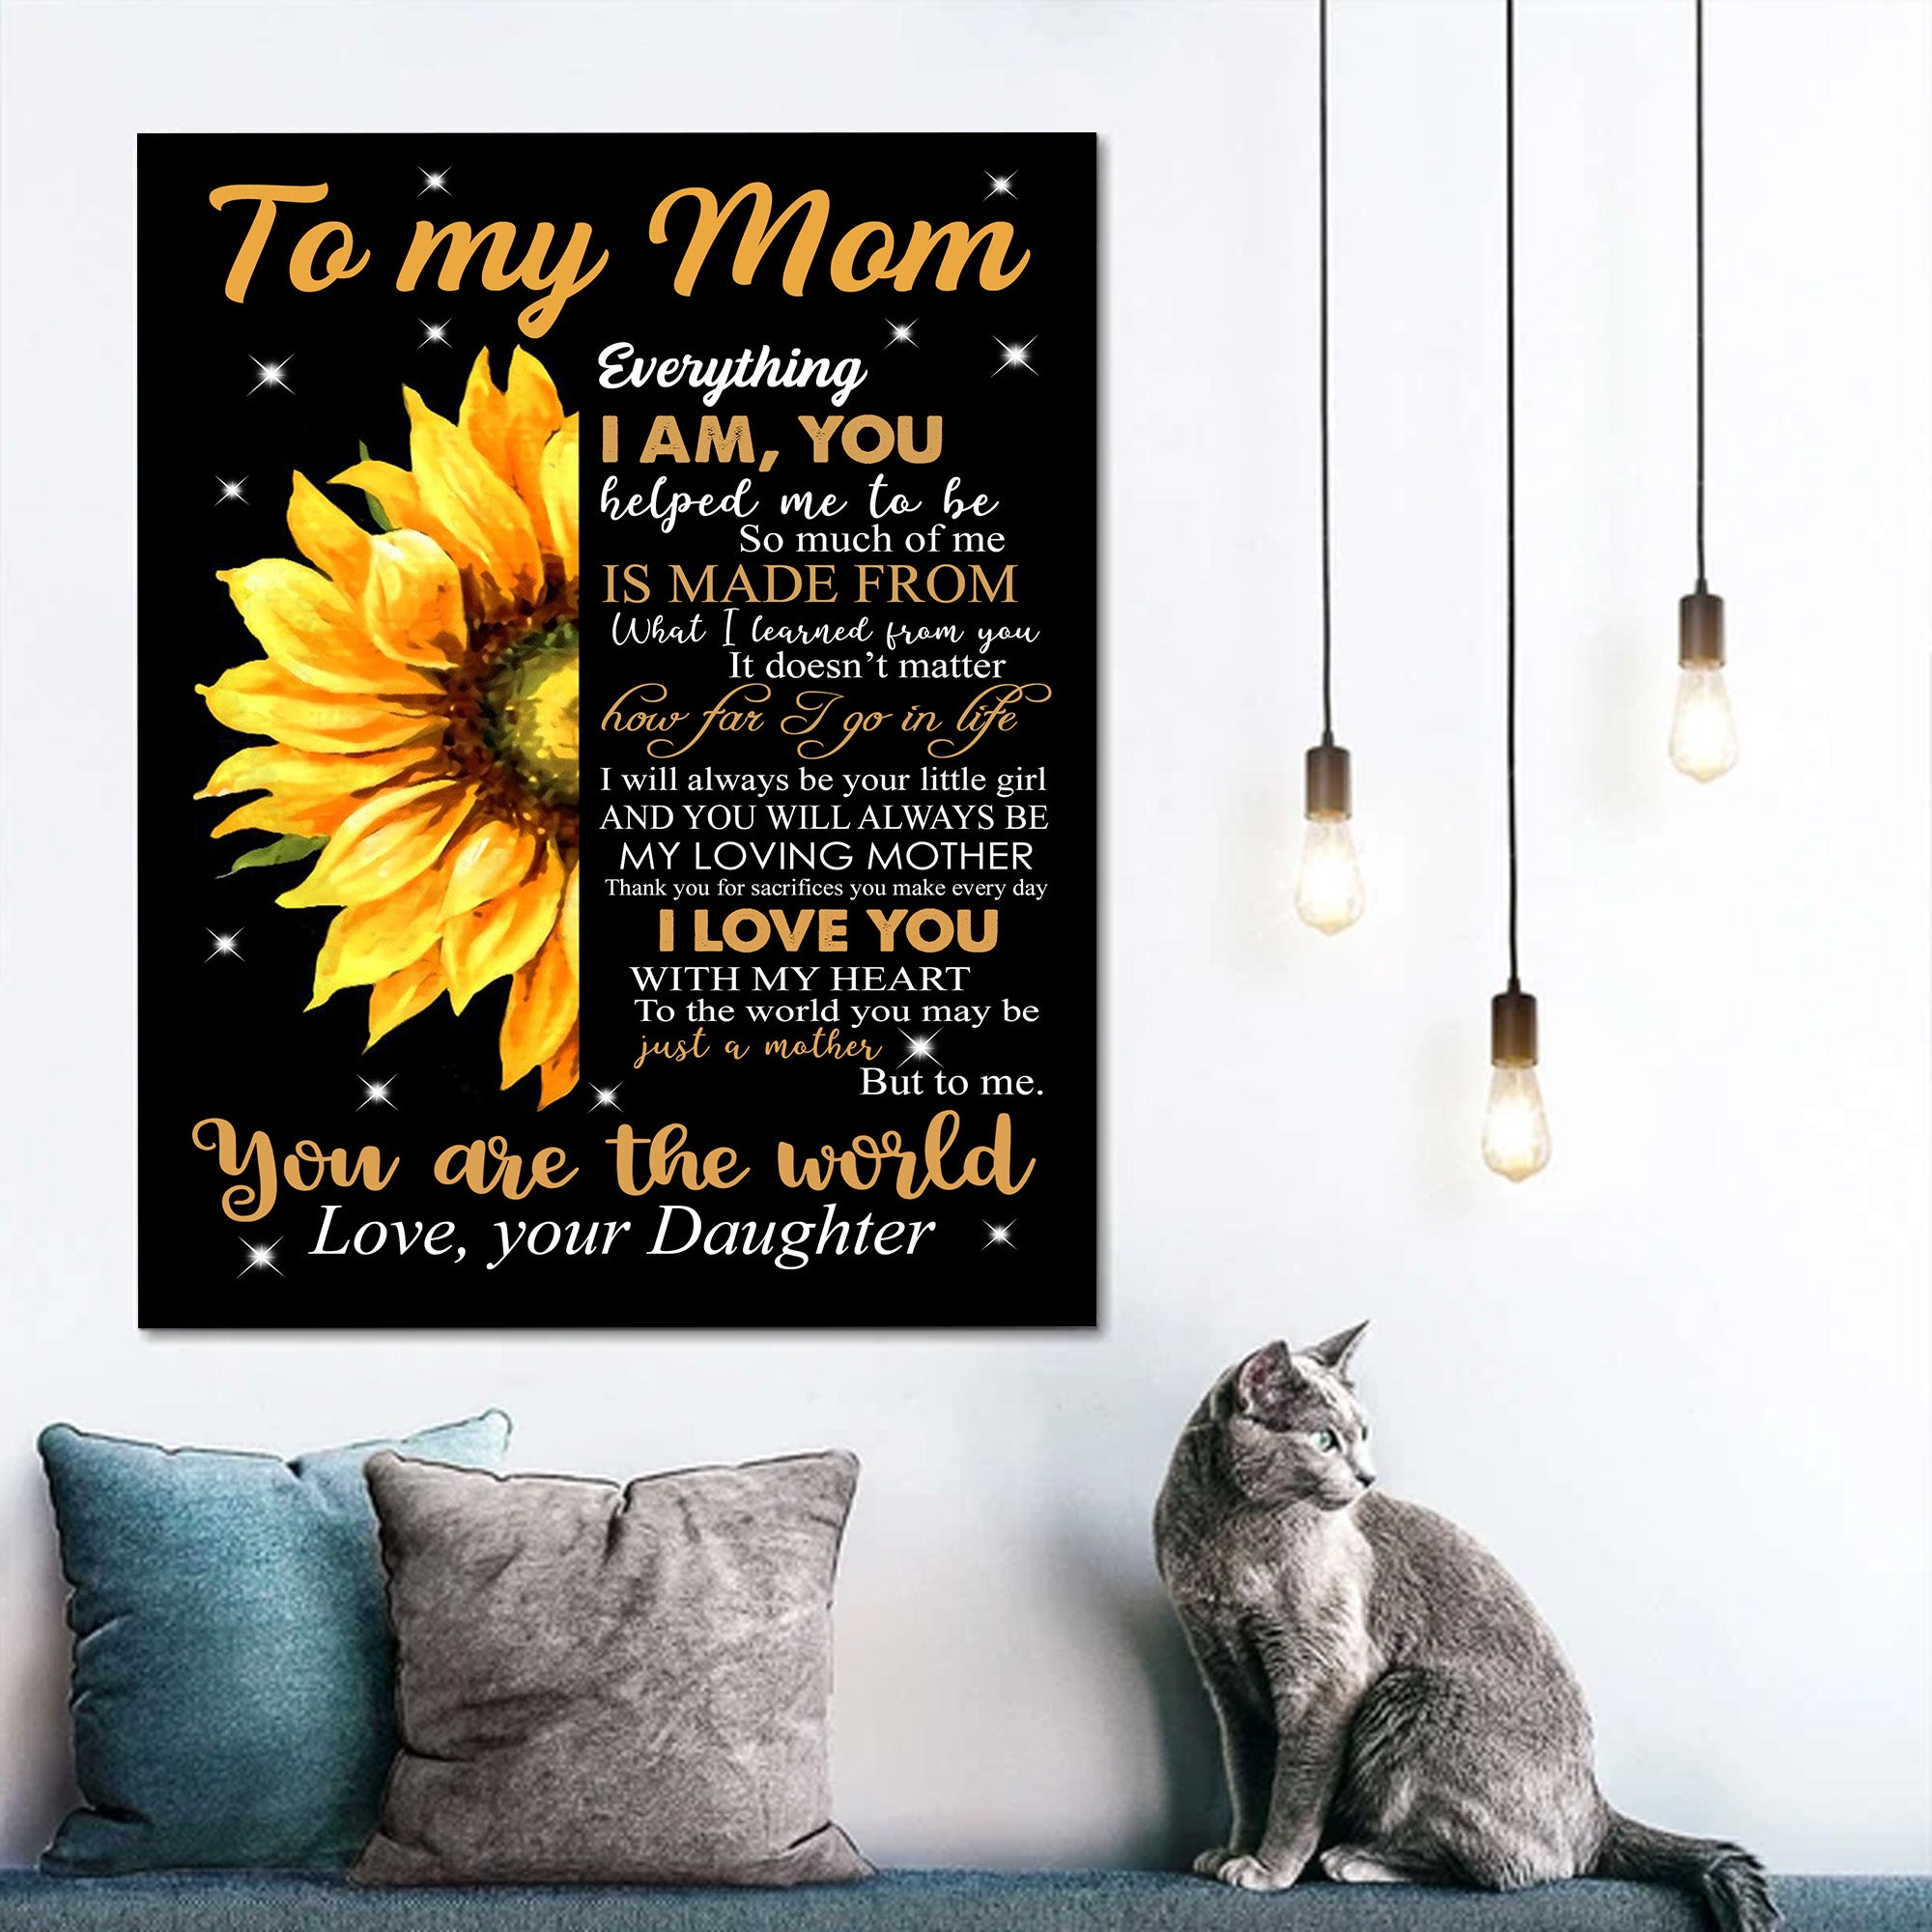 Sunflower Canvas To Mom From Daughter – Everything I Am, You Helped Me To Be